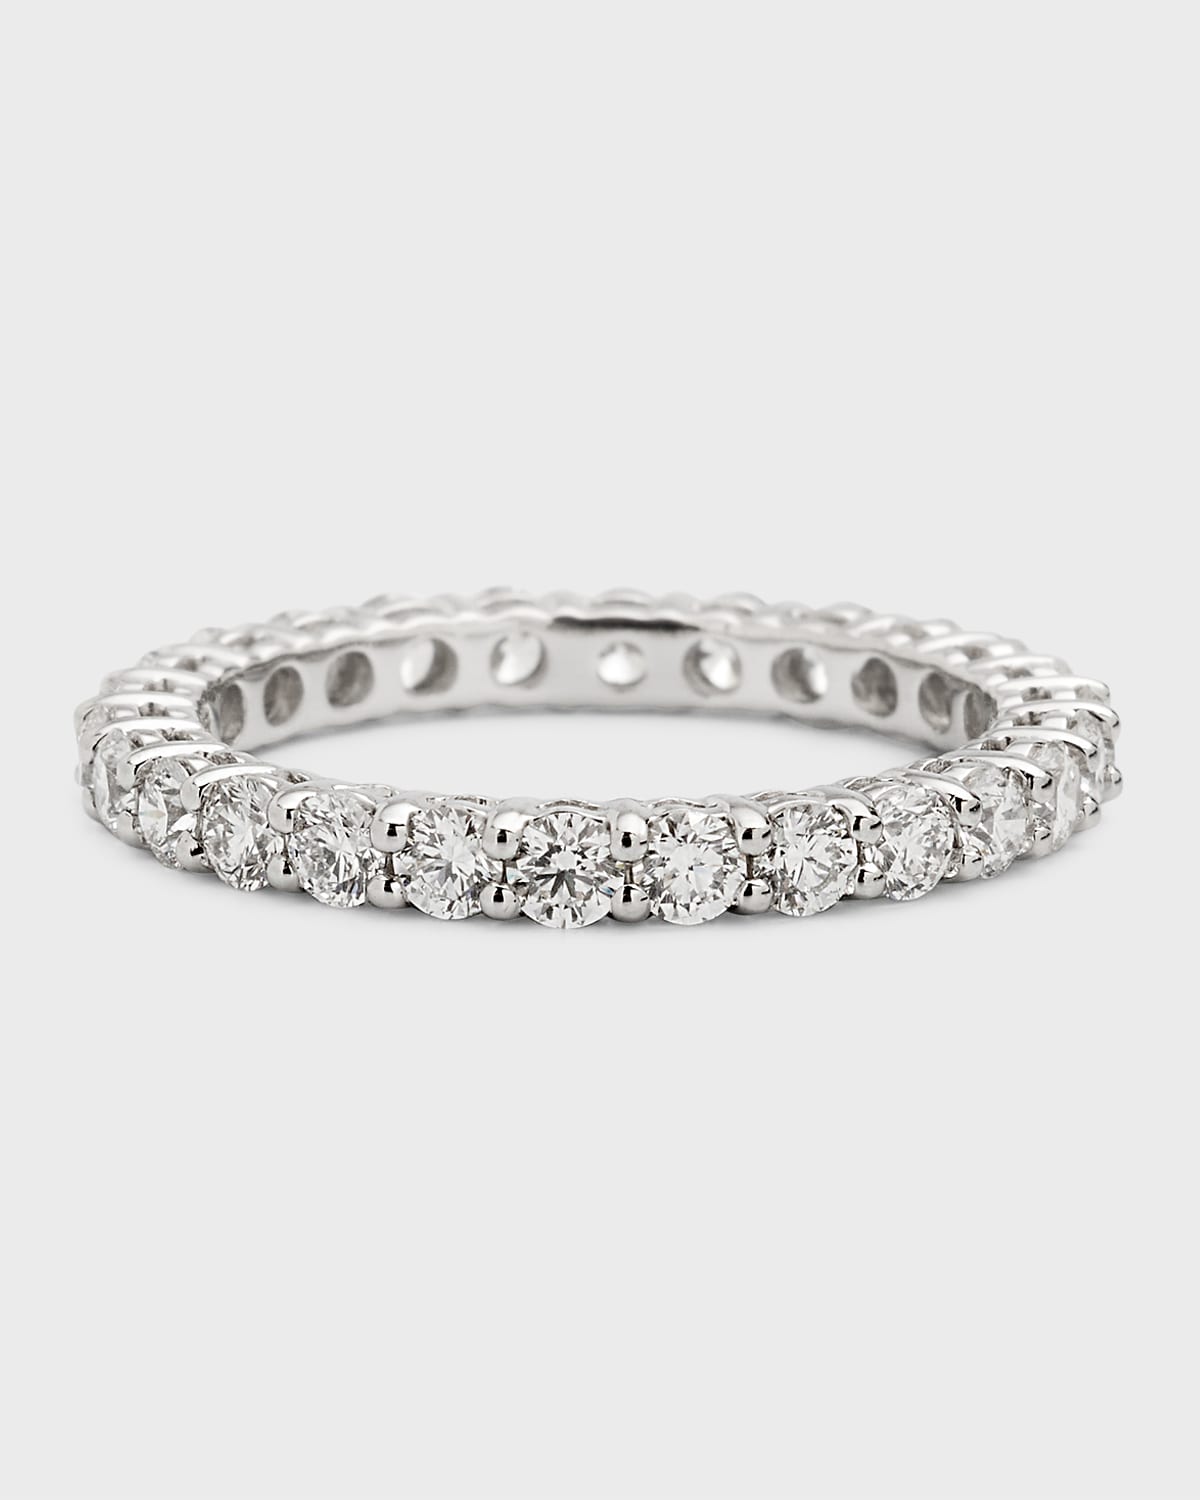 NM Diamond Collection Diamond Eternity Band Ring in Platinum, Size 6.5